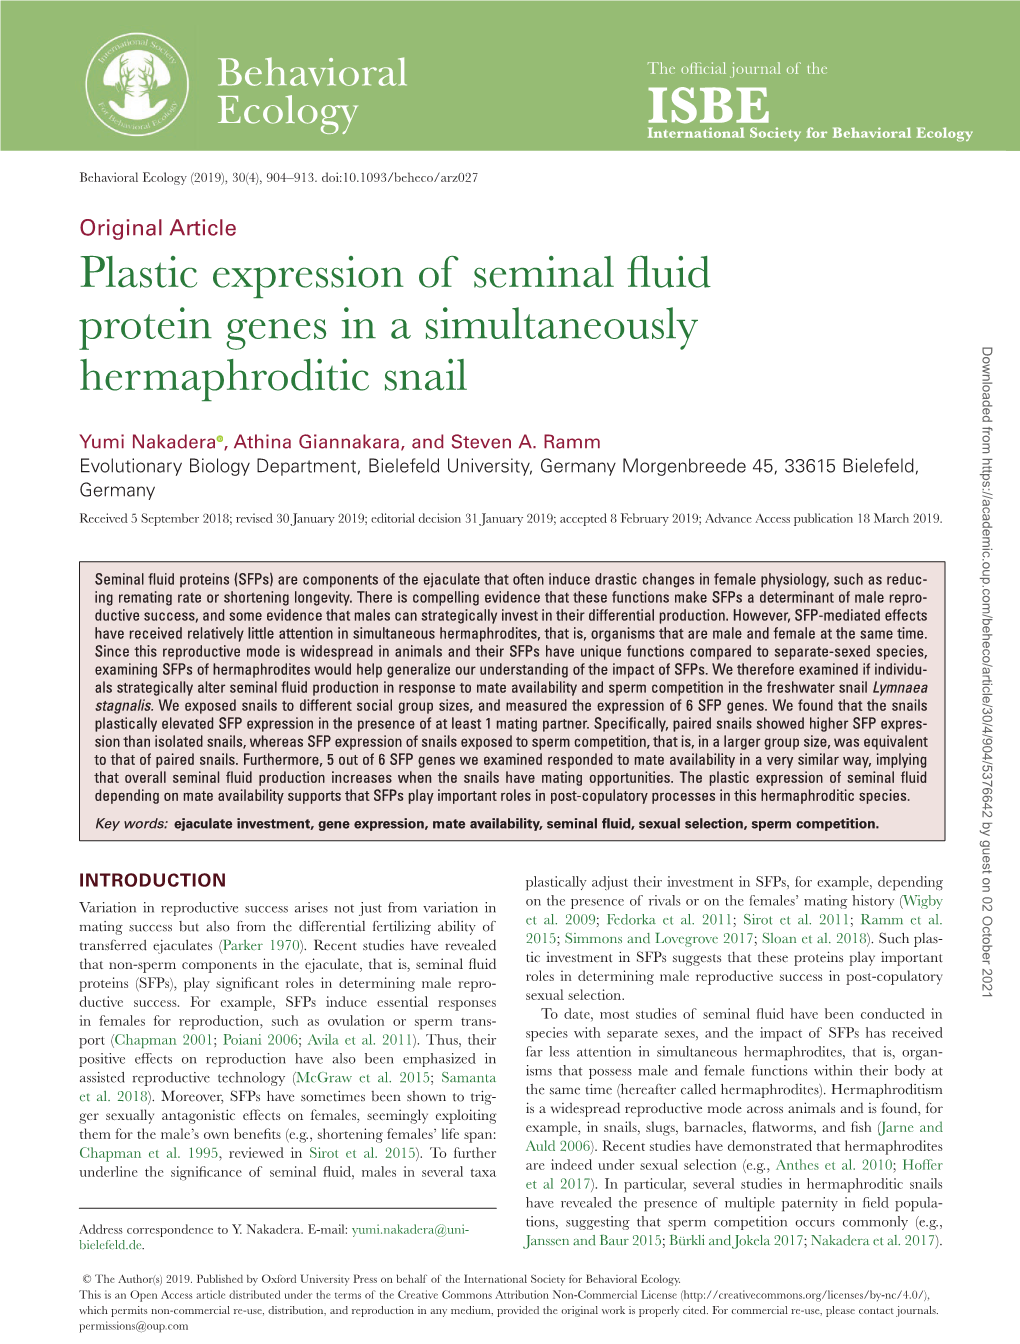 Plastic Expression of Seminal Fluid Protein Genes in a Simultaneously